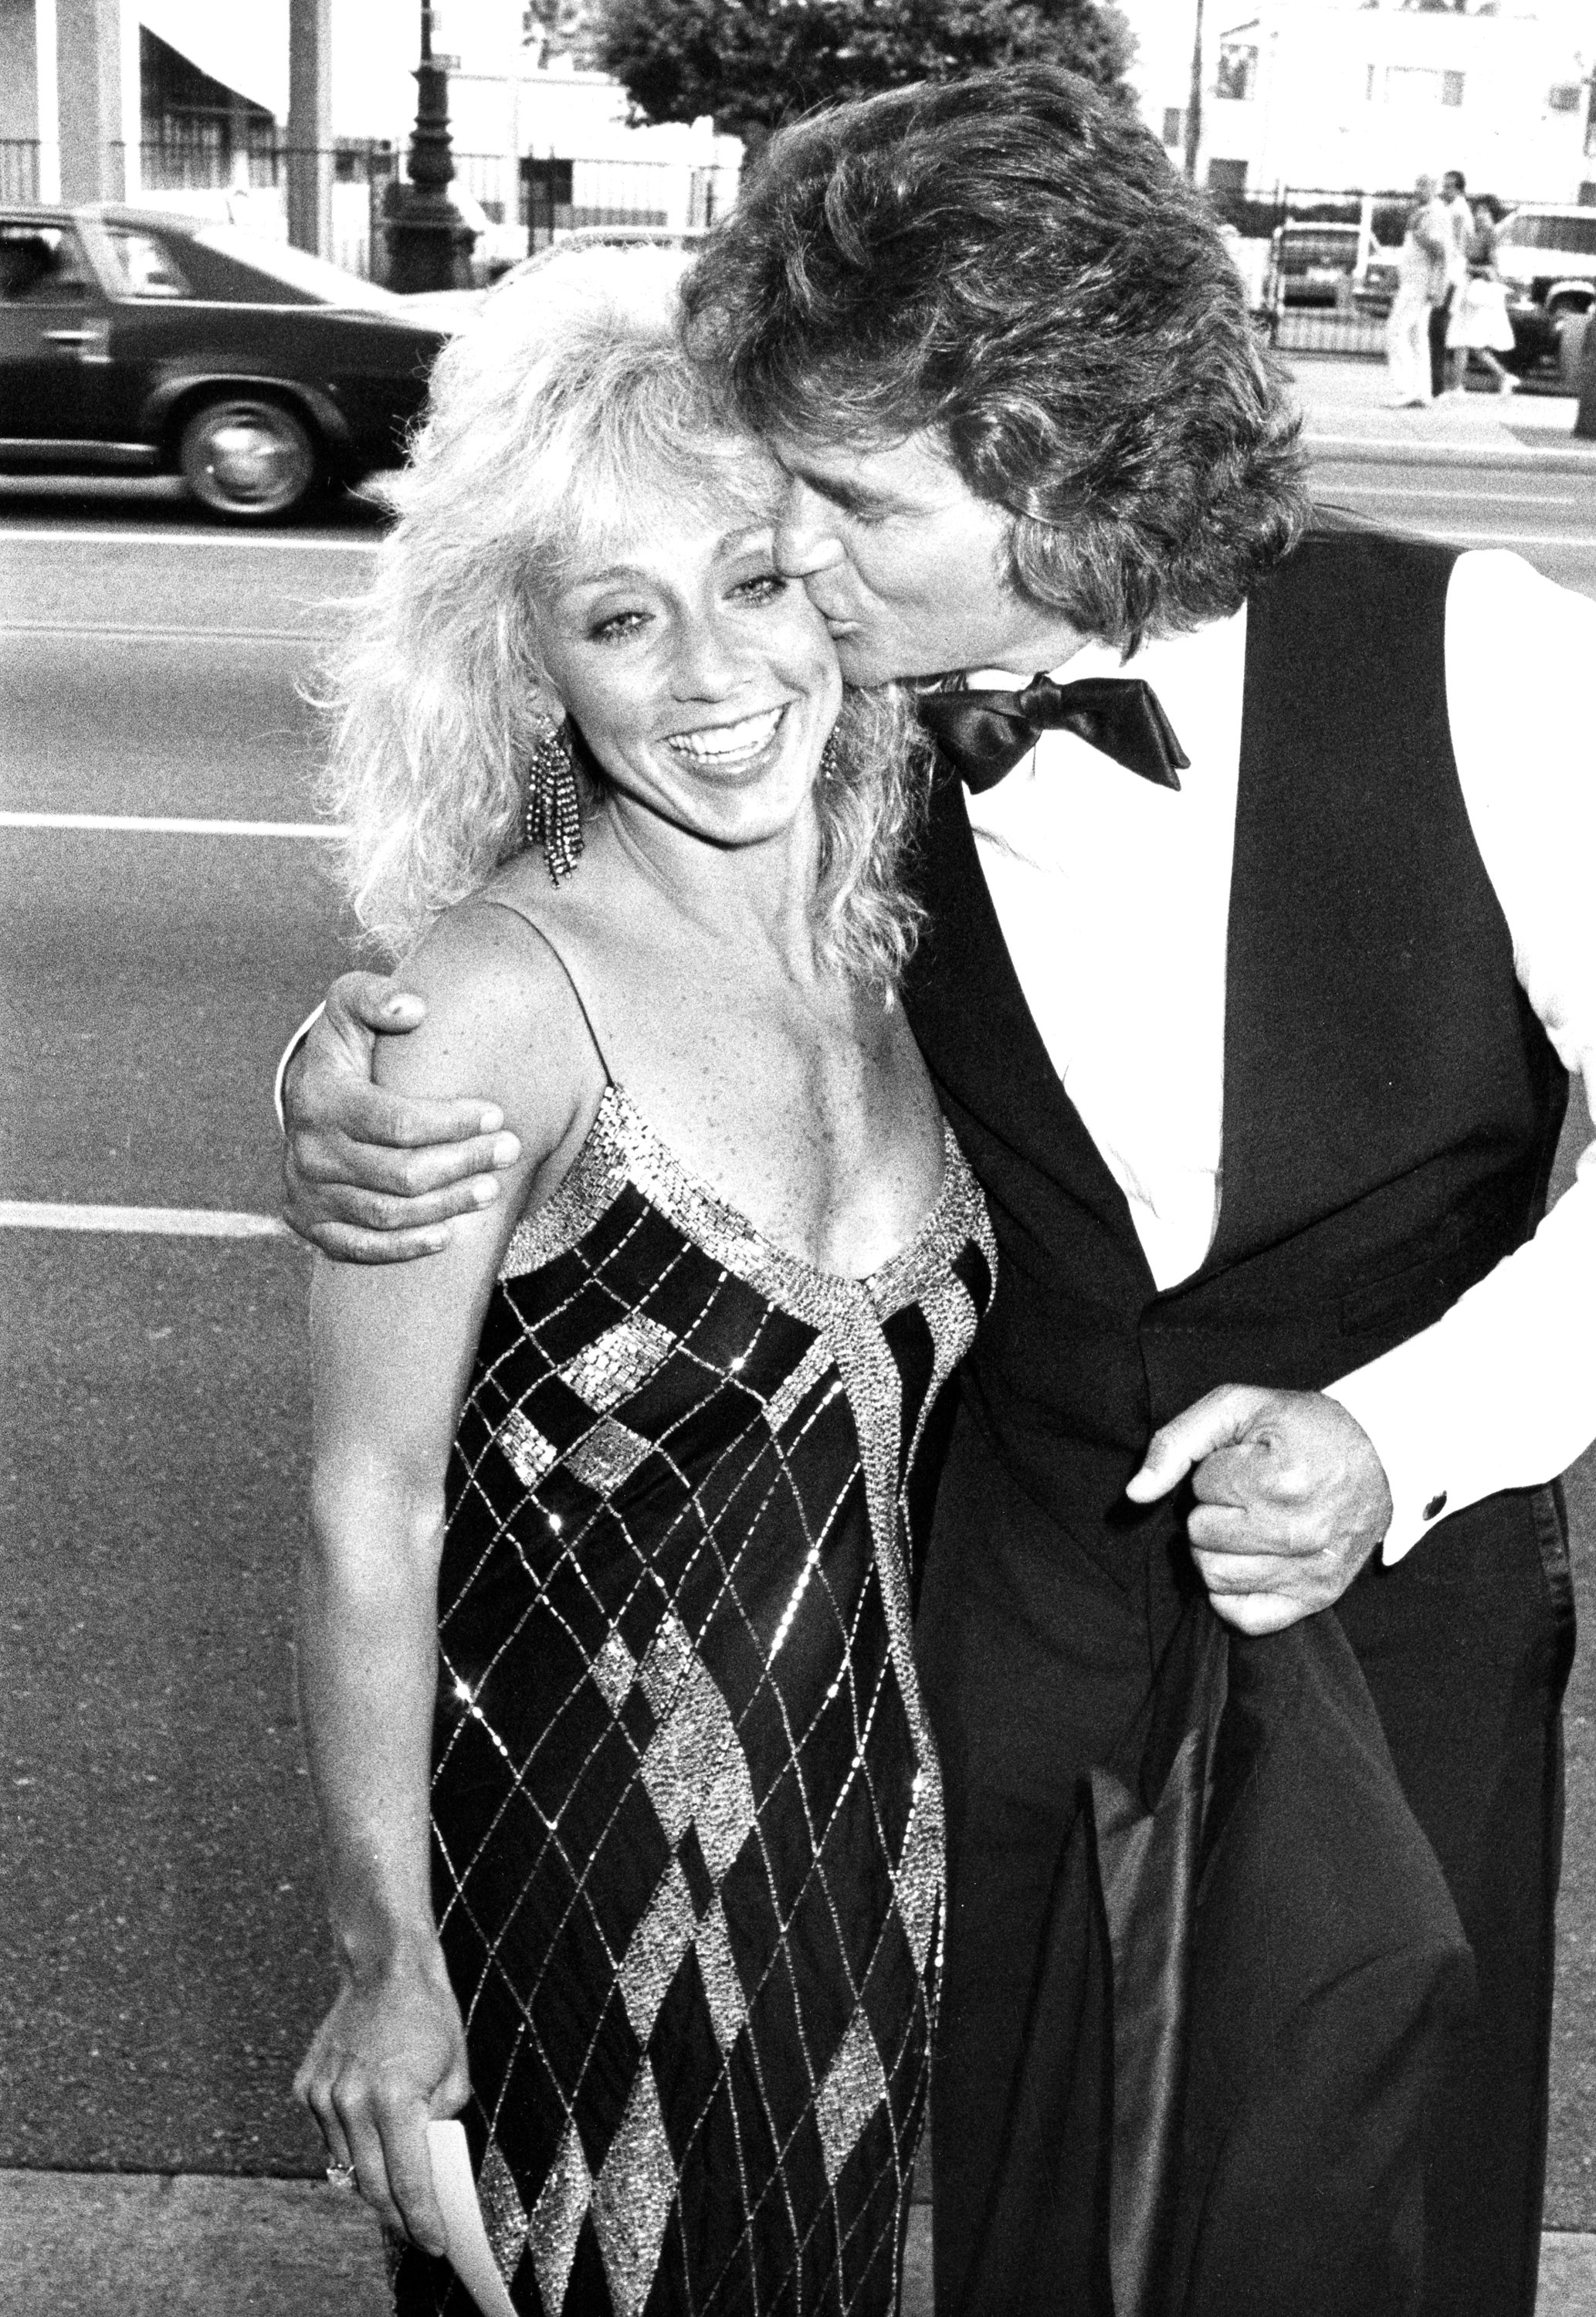 Michael Landon and wife Cindy Clerico attend the premiere of "Sam's Son" at the Academy Theater on August 15, 1984 in Beverly Hills, California. | Source: Getty Images